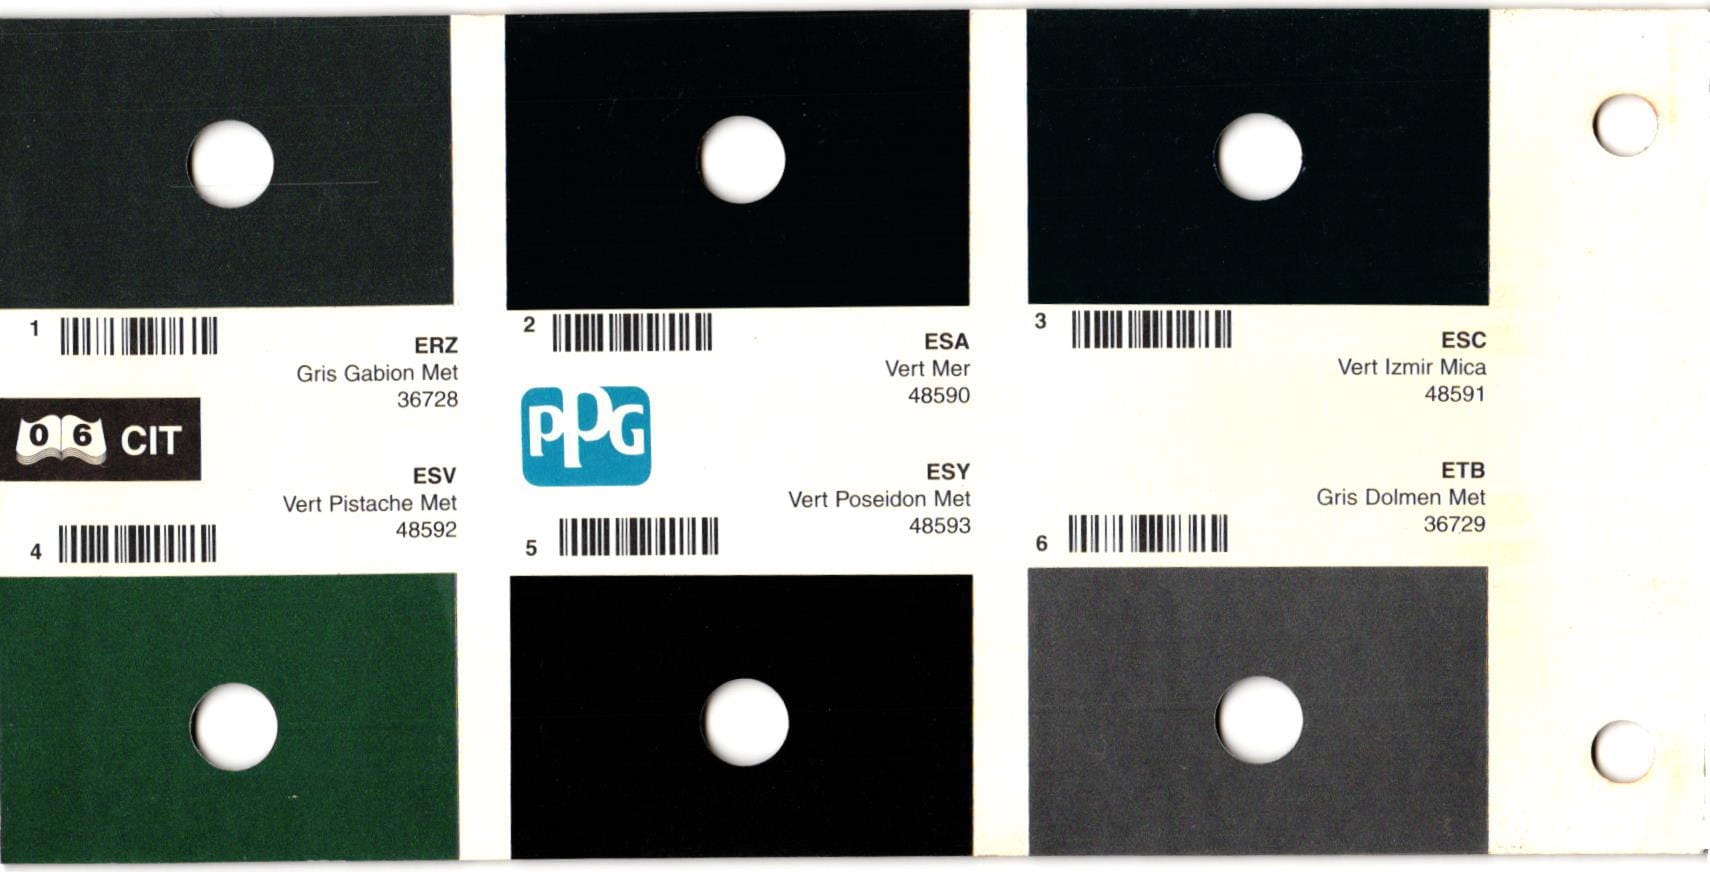 Paint codes, color swatches and PPG mixing formula numbers for the stand varience of ppg paints